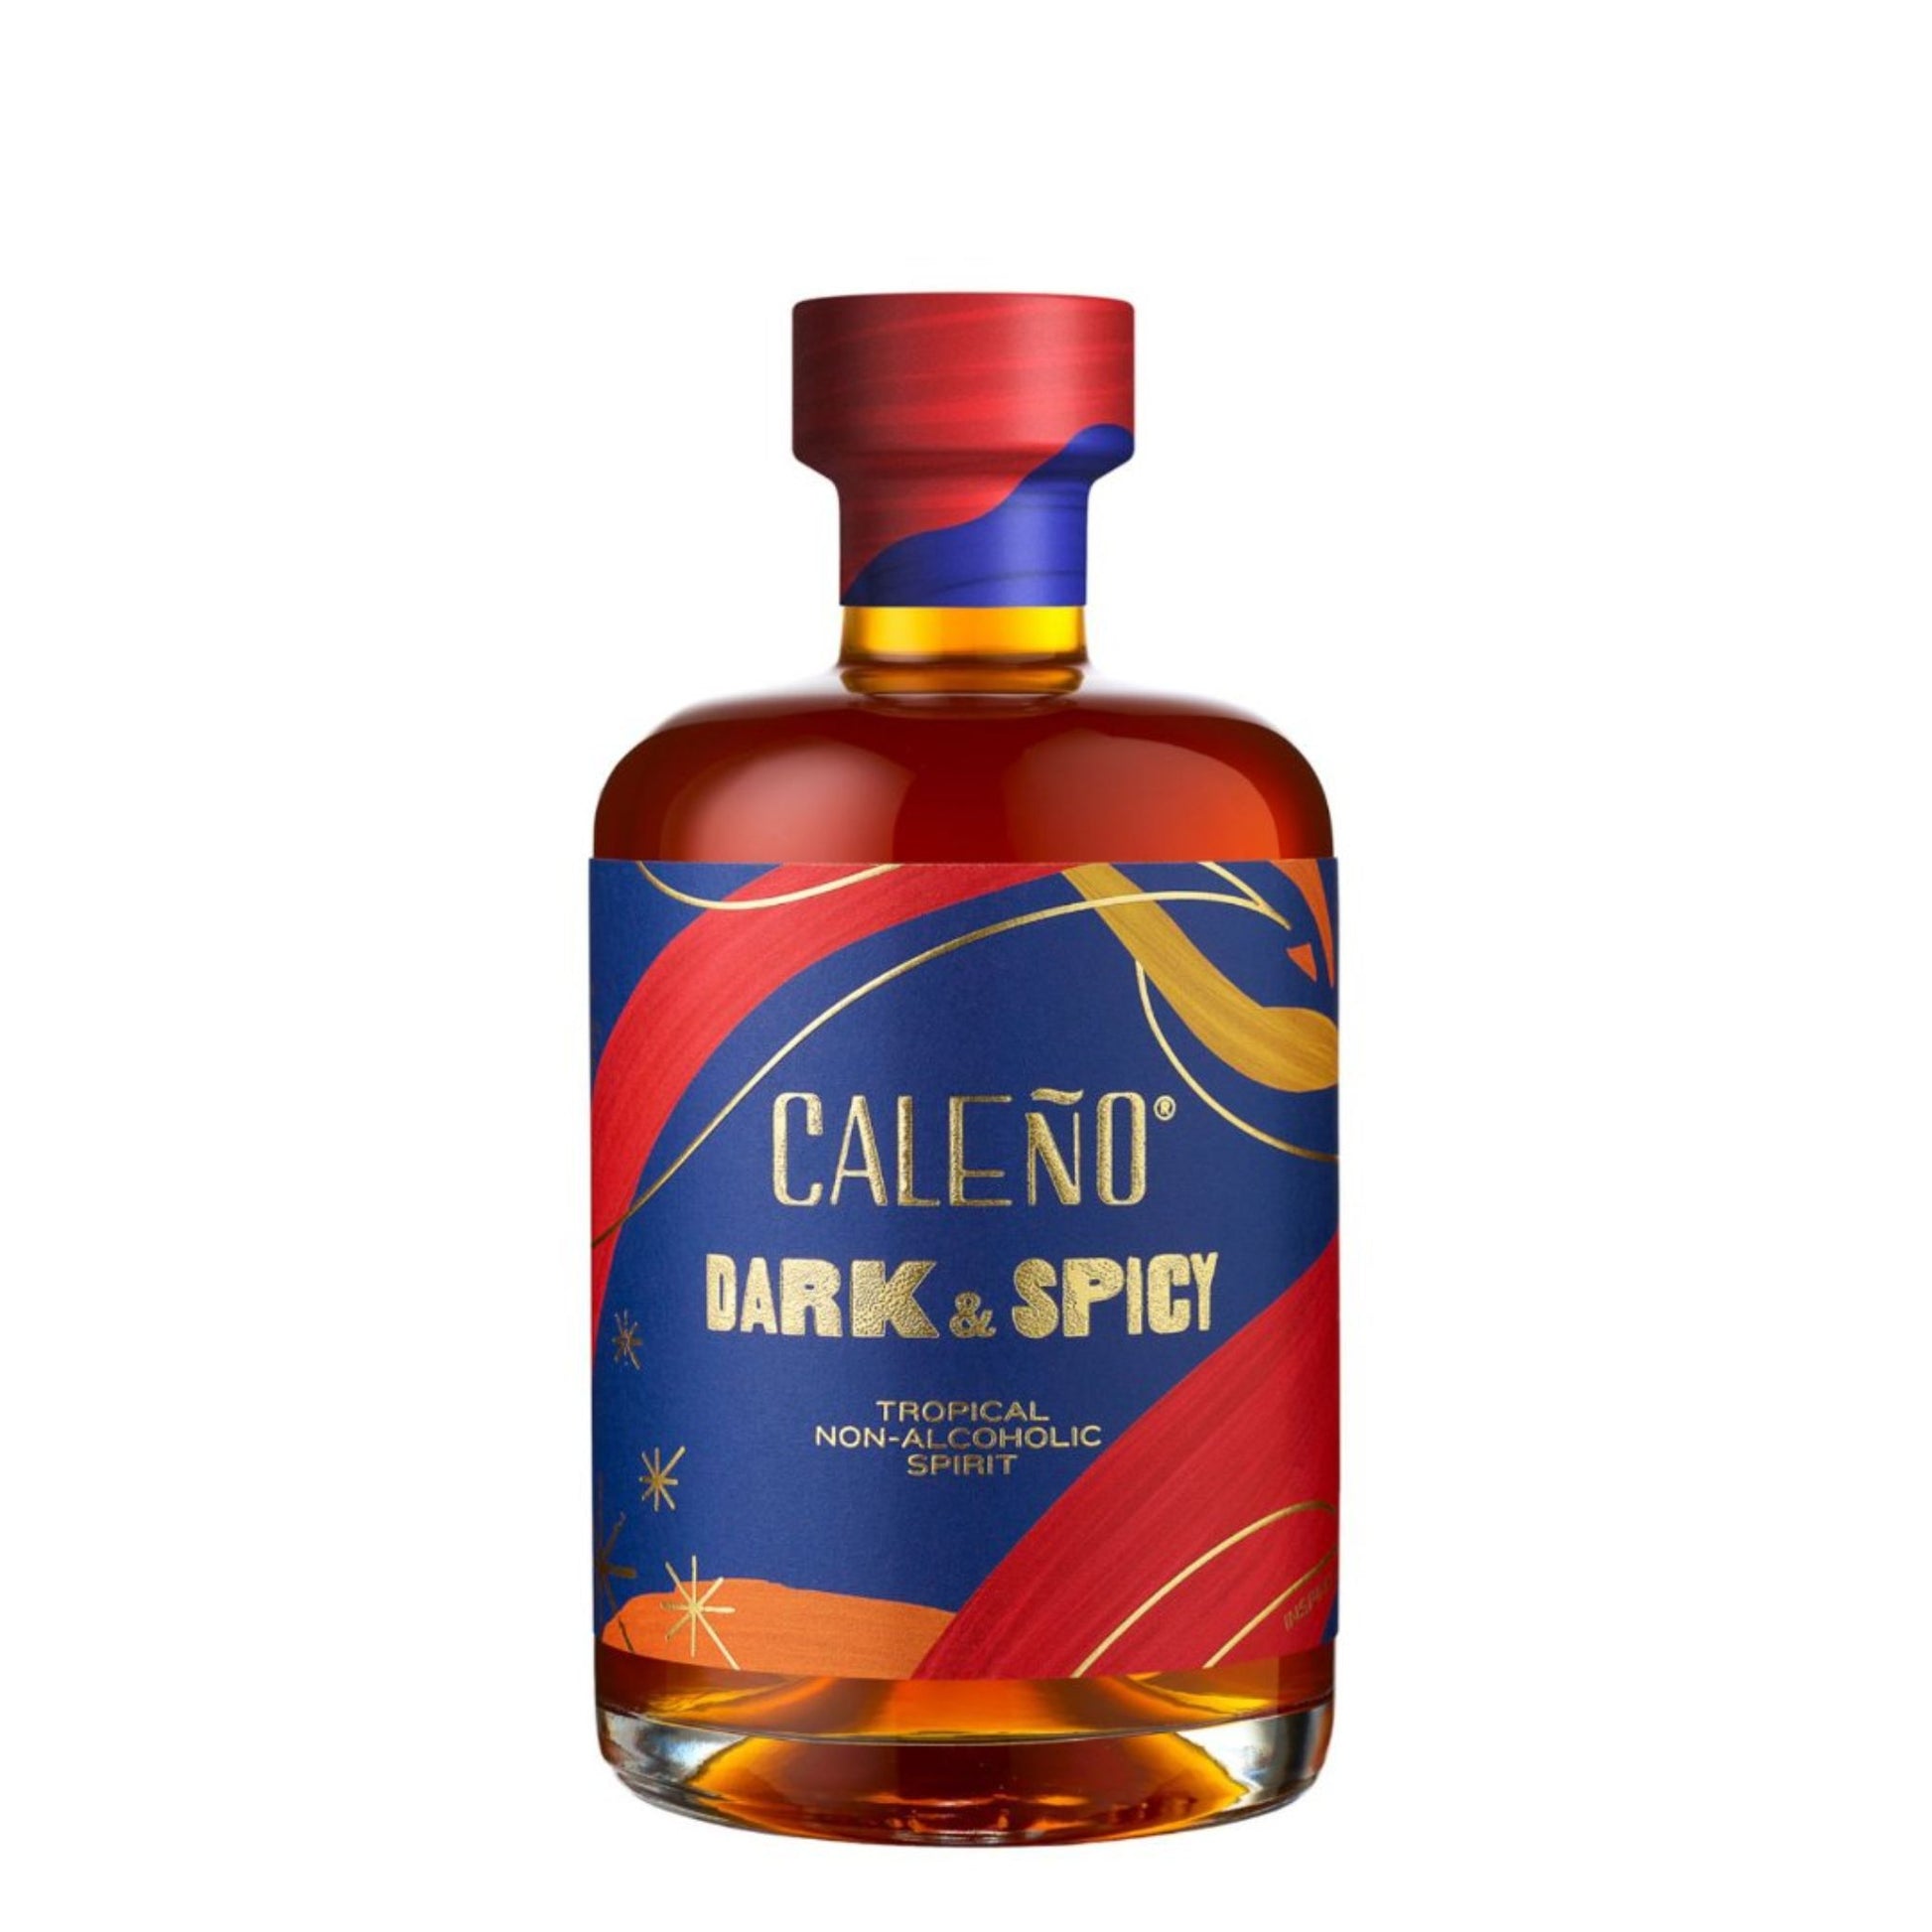 CALENO Dark and Spicy Non-Alcoholic Rum is available at Knyota Non-Alcoholic Drinks.